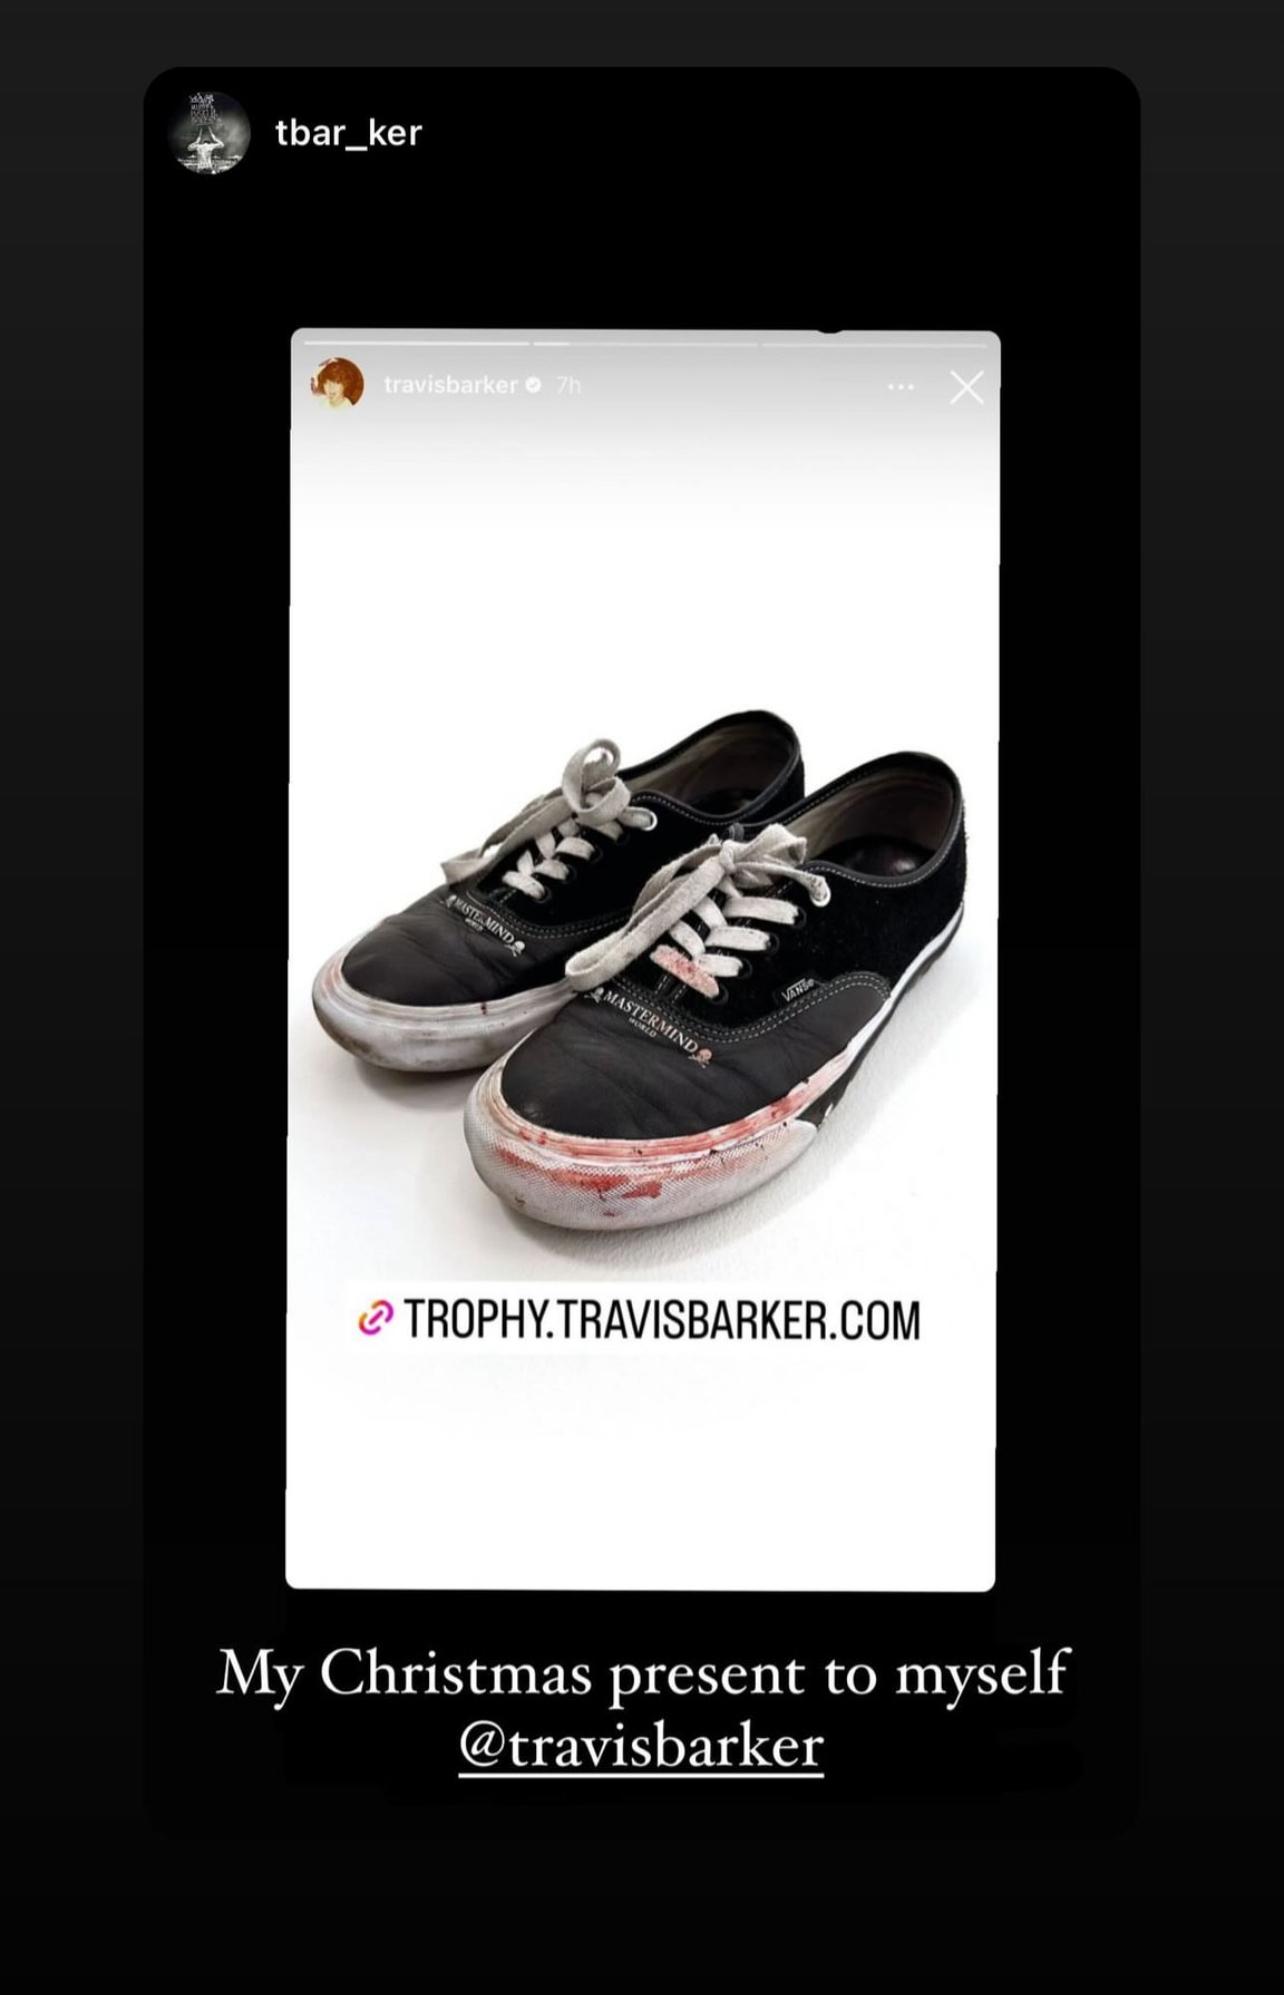 Travis Barker's Blooded Tour Worn Vans Sold Out For $4,000